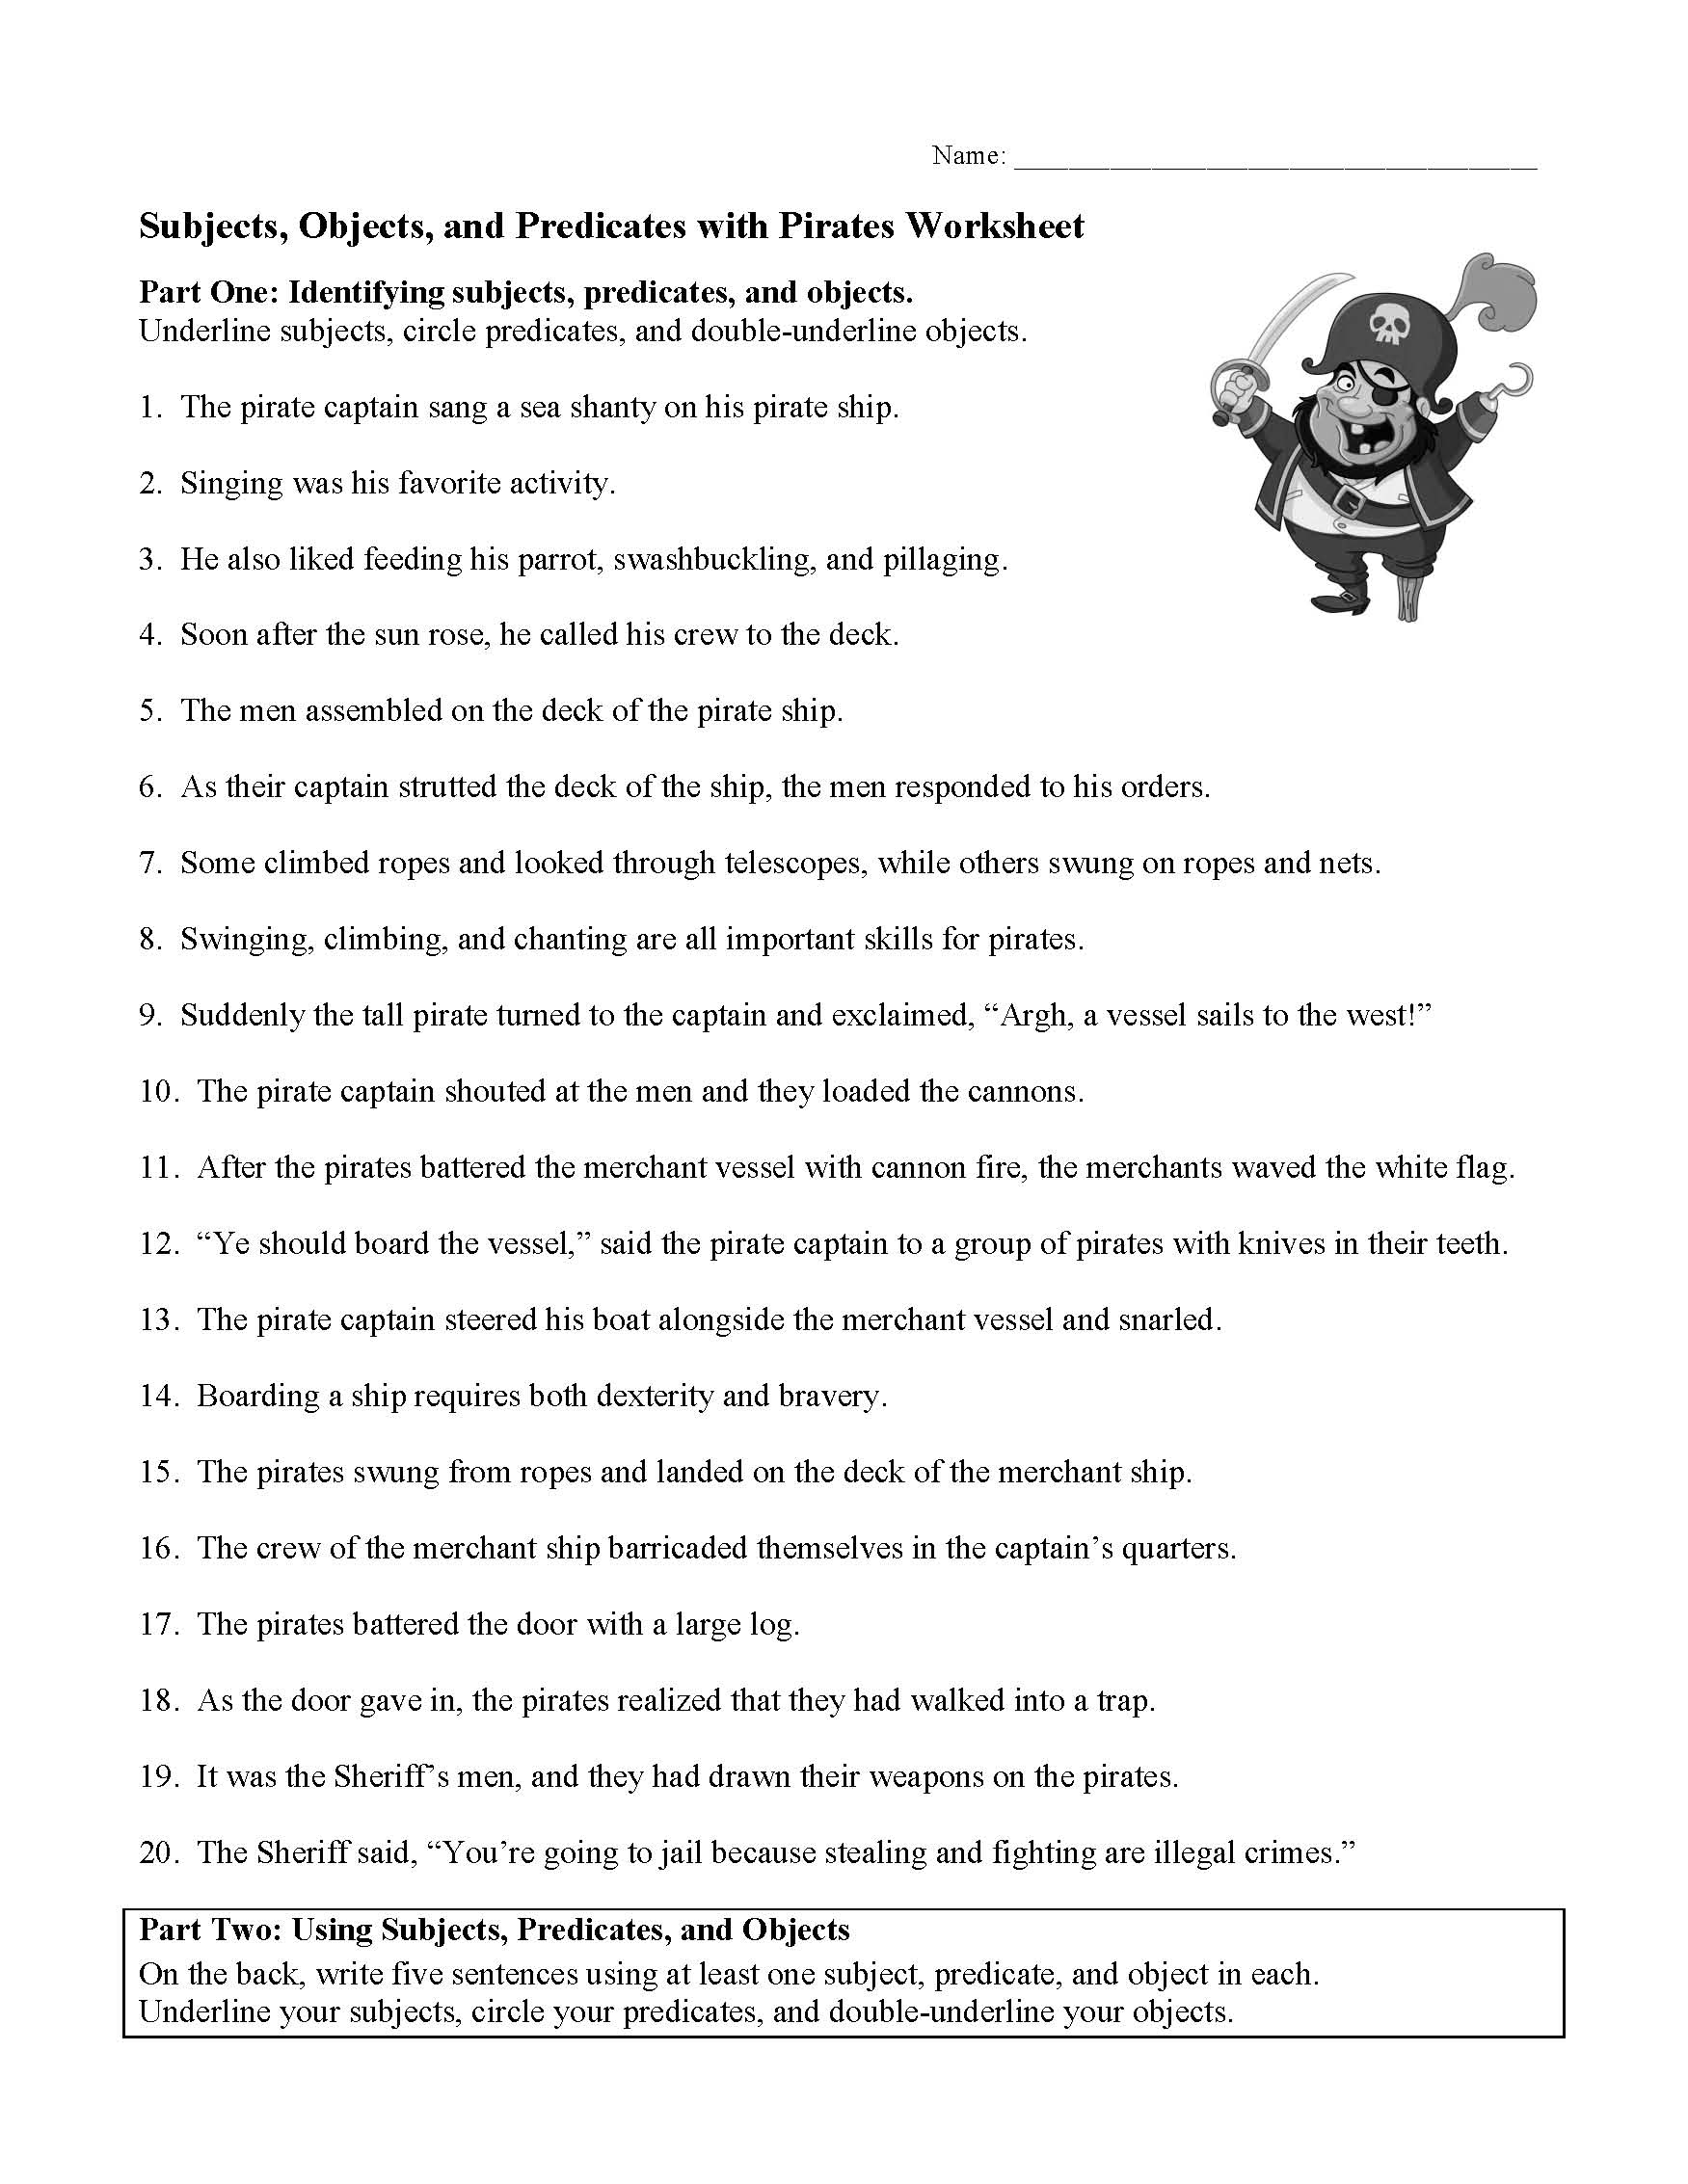 subjects-objects-and-predicates-with-pirates-worksheet-preview